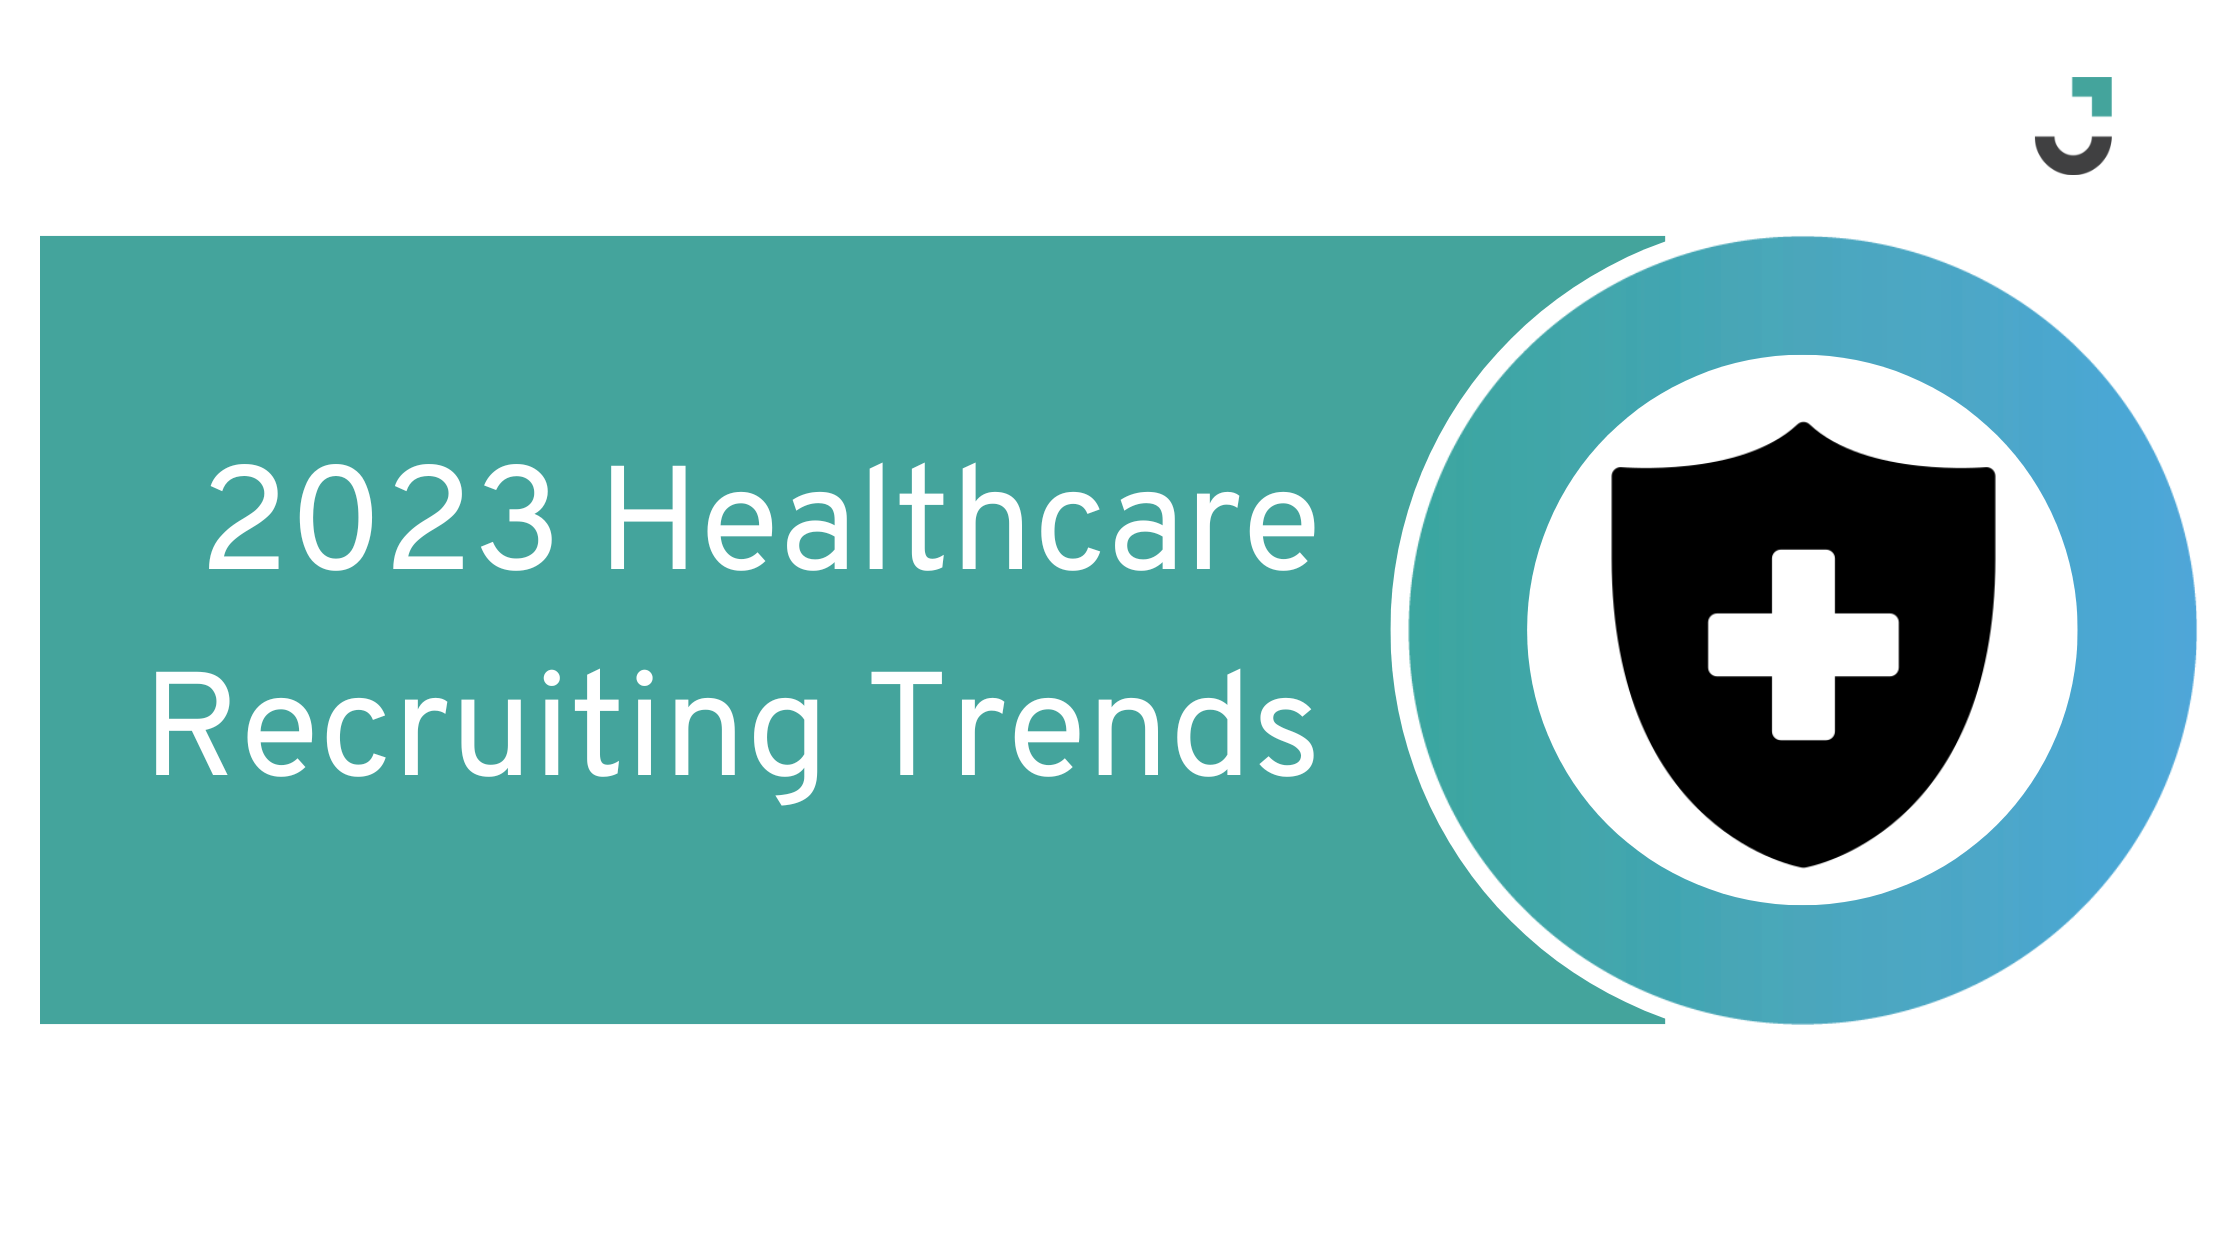 2023 Healthcare Recruiting Trends